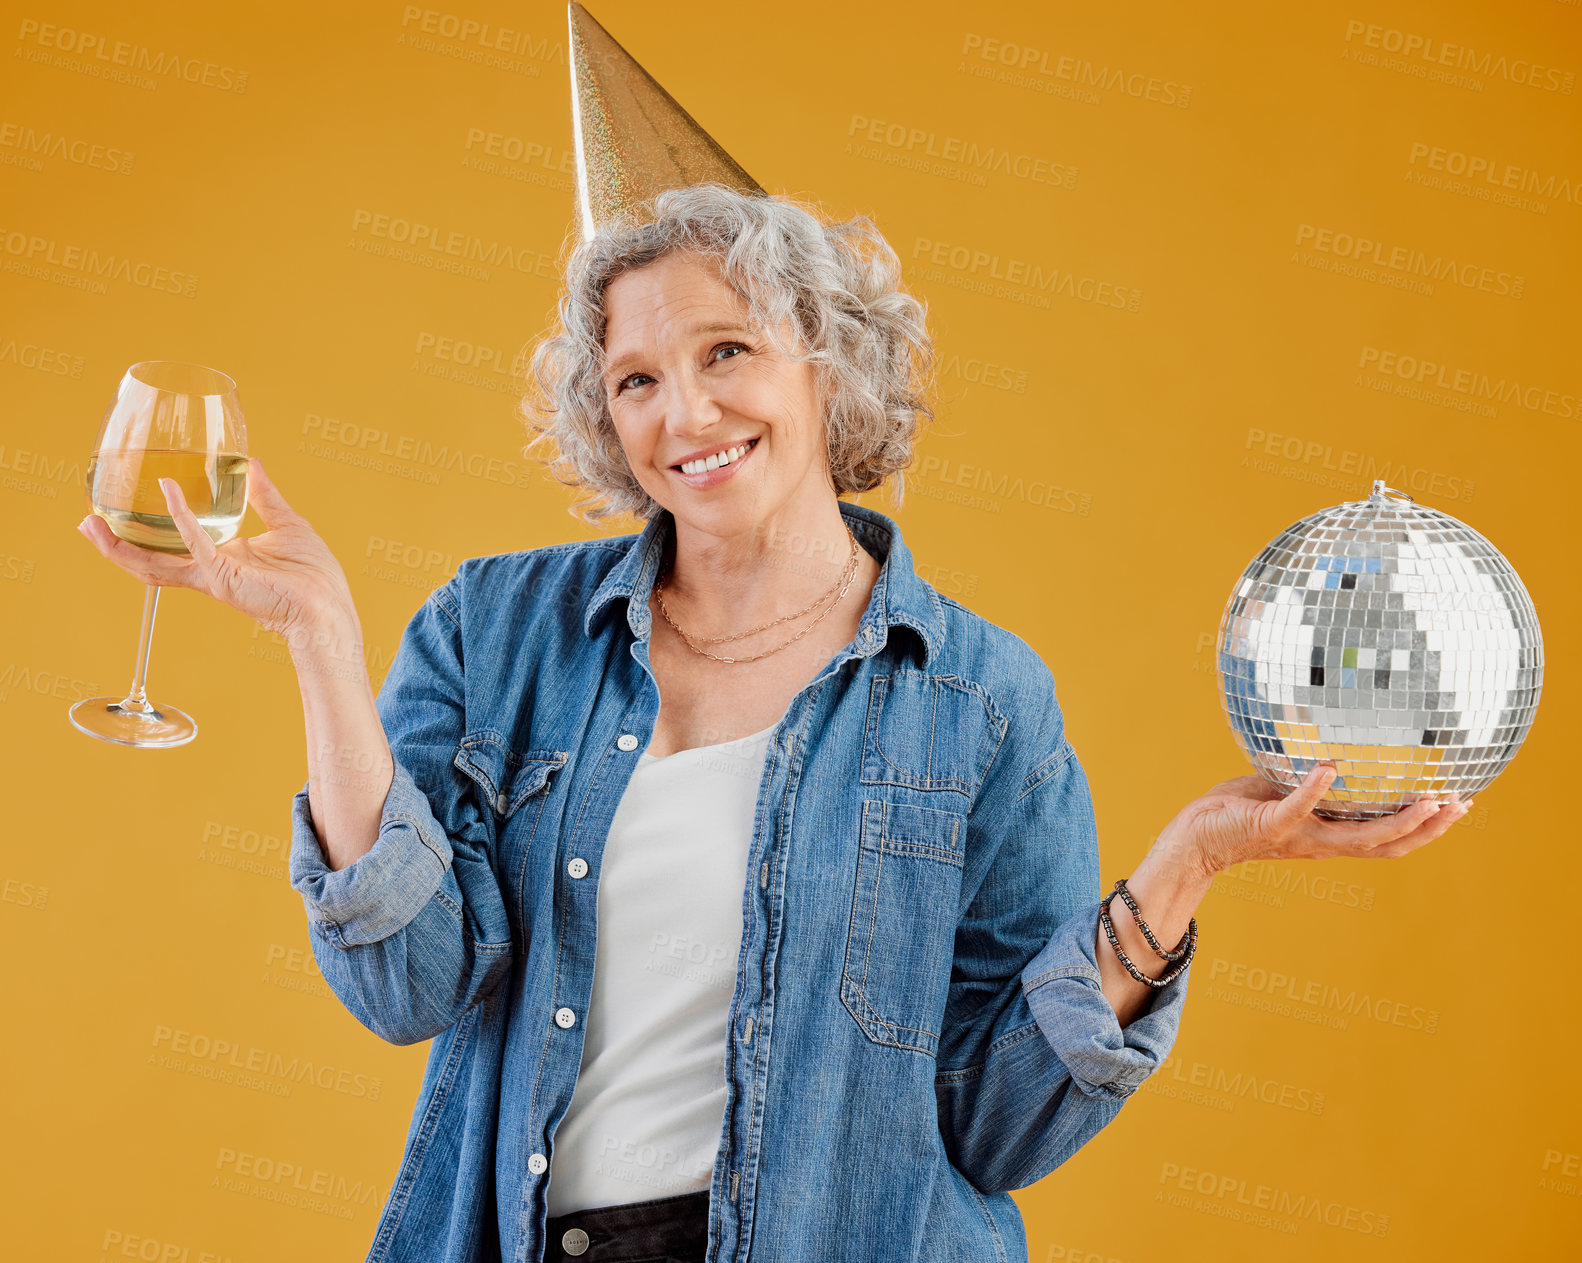 Buy stock photo One happy mature caucasian woman holding a disco ball and drinking a glass of white wine while wearing a birthday hat against a yellow background in the studio. Smiling white lady celebrating